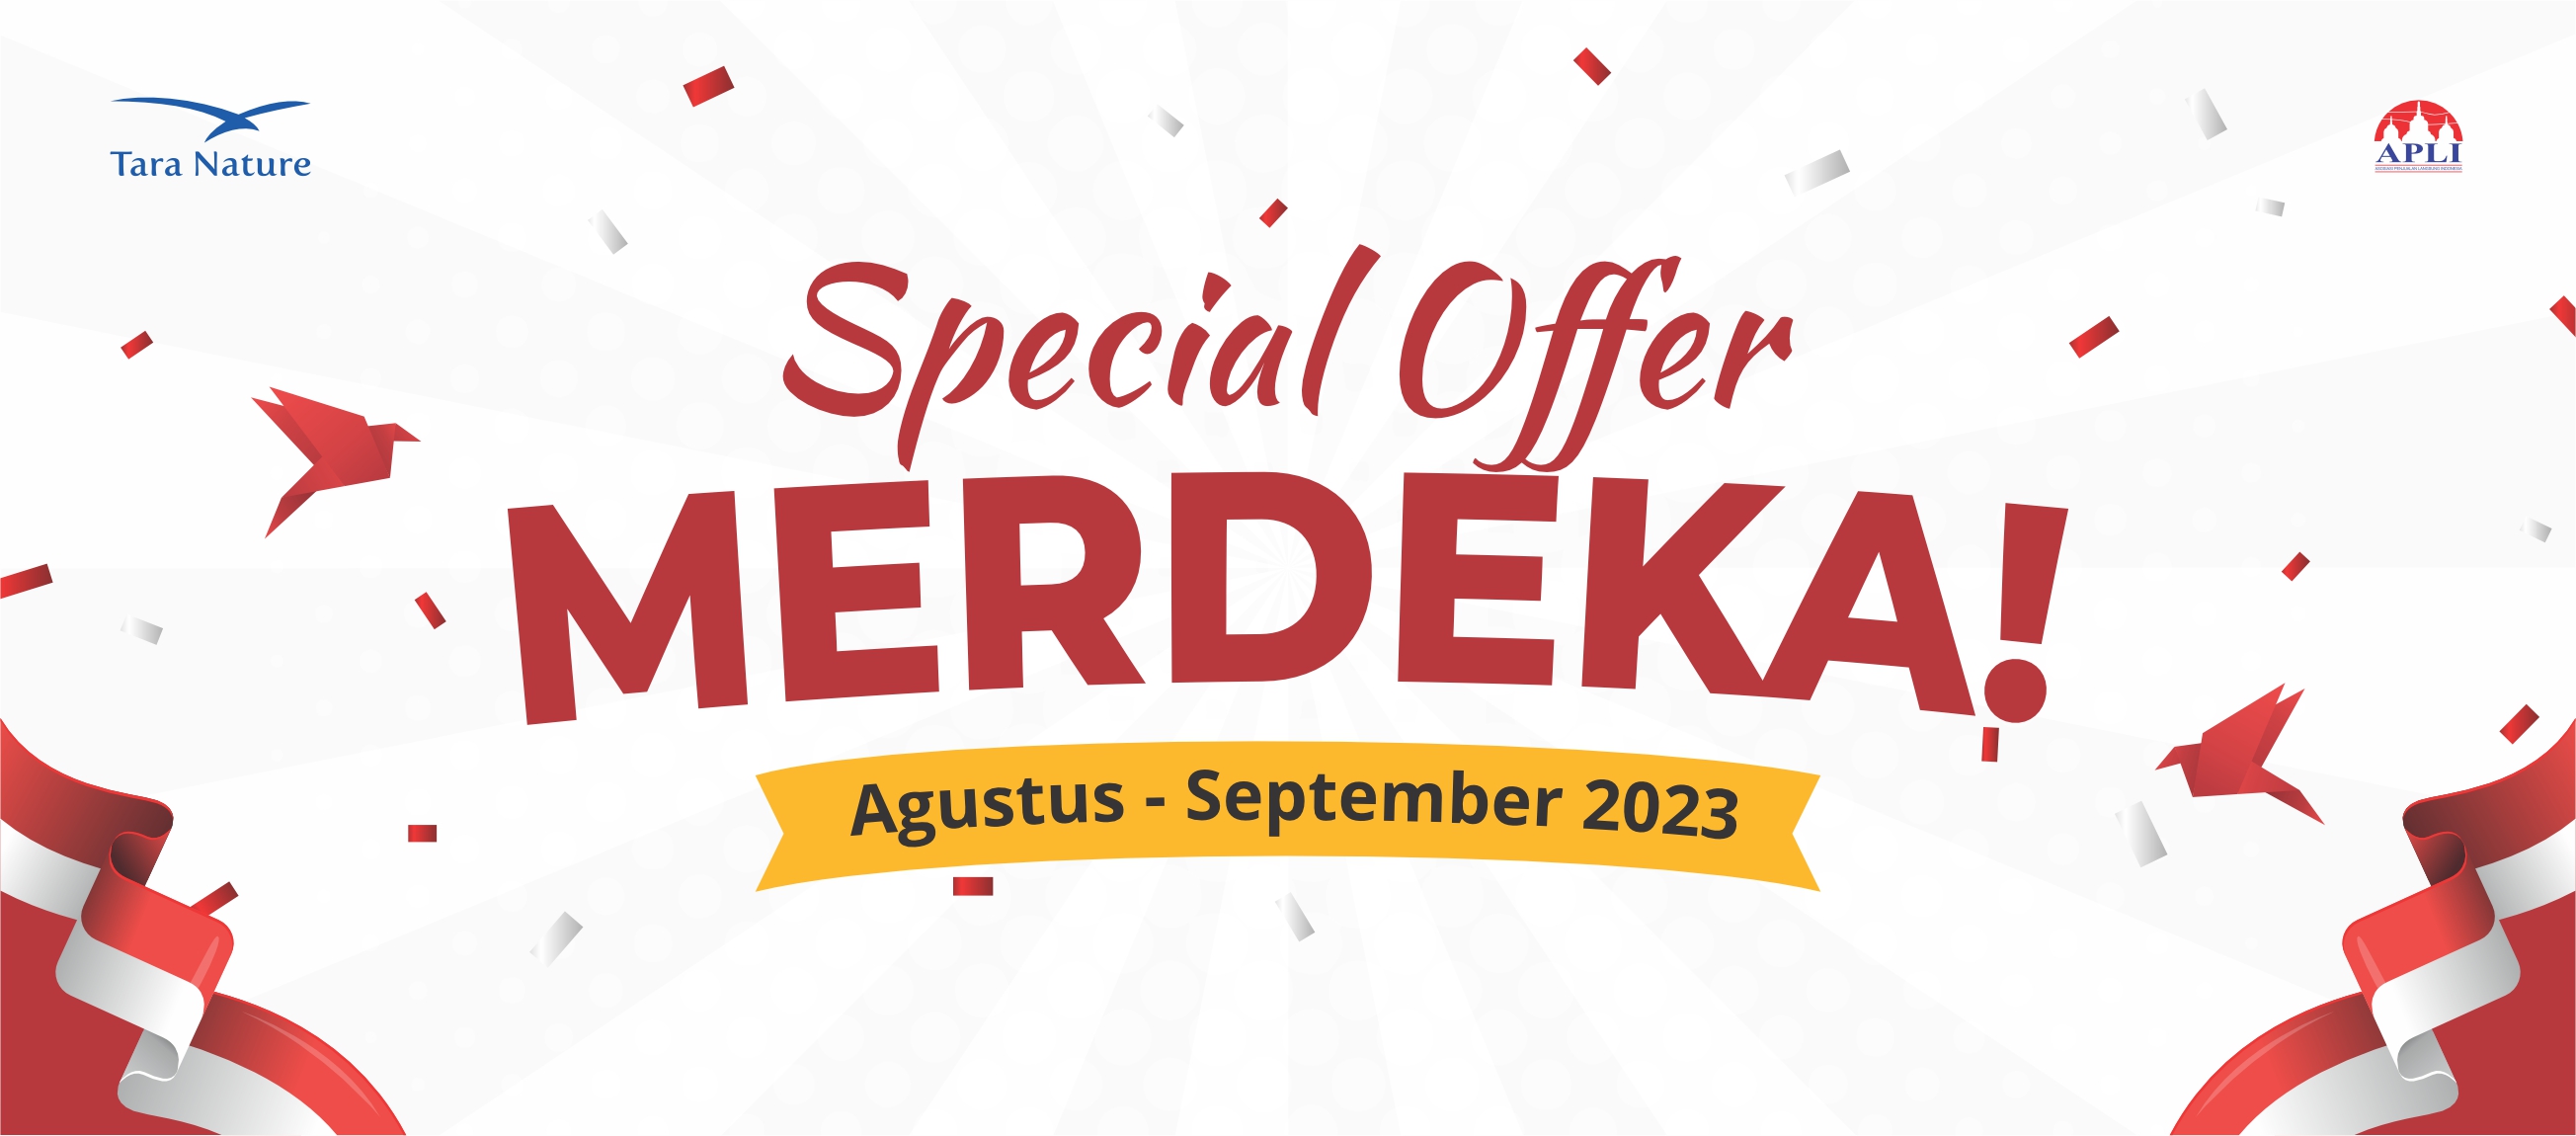 00 Special Offer Agustus 2023 mobile